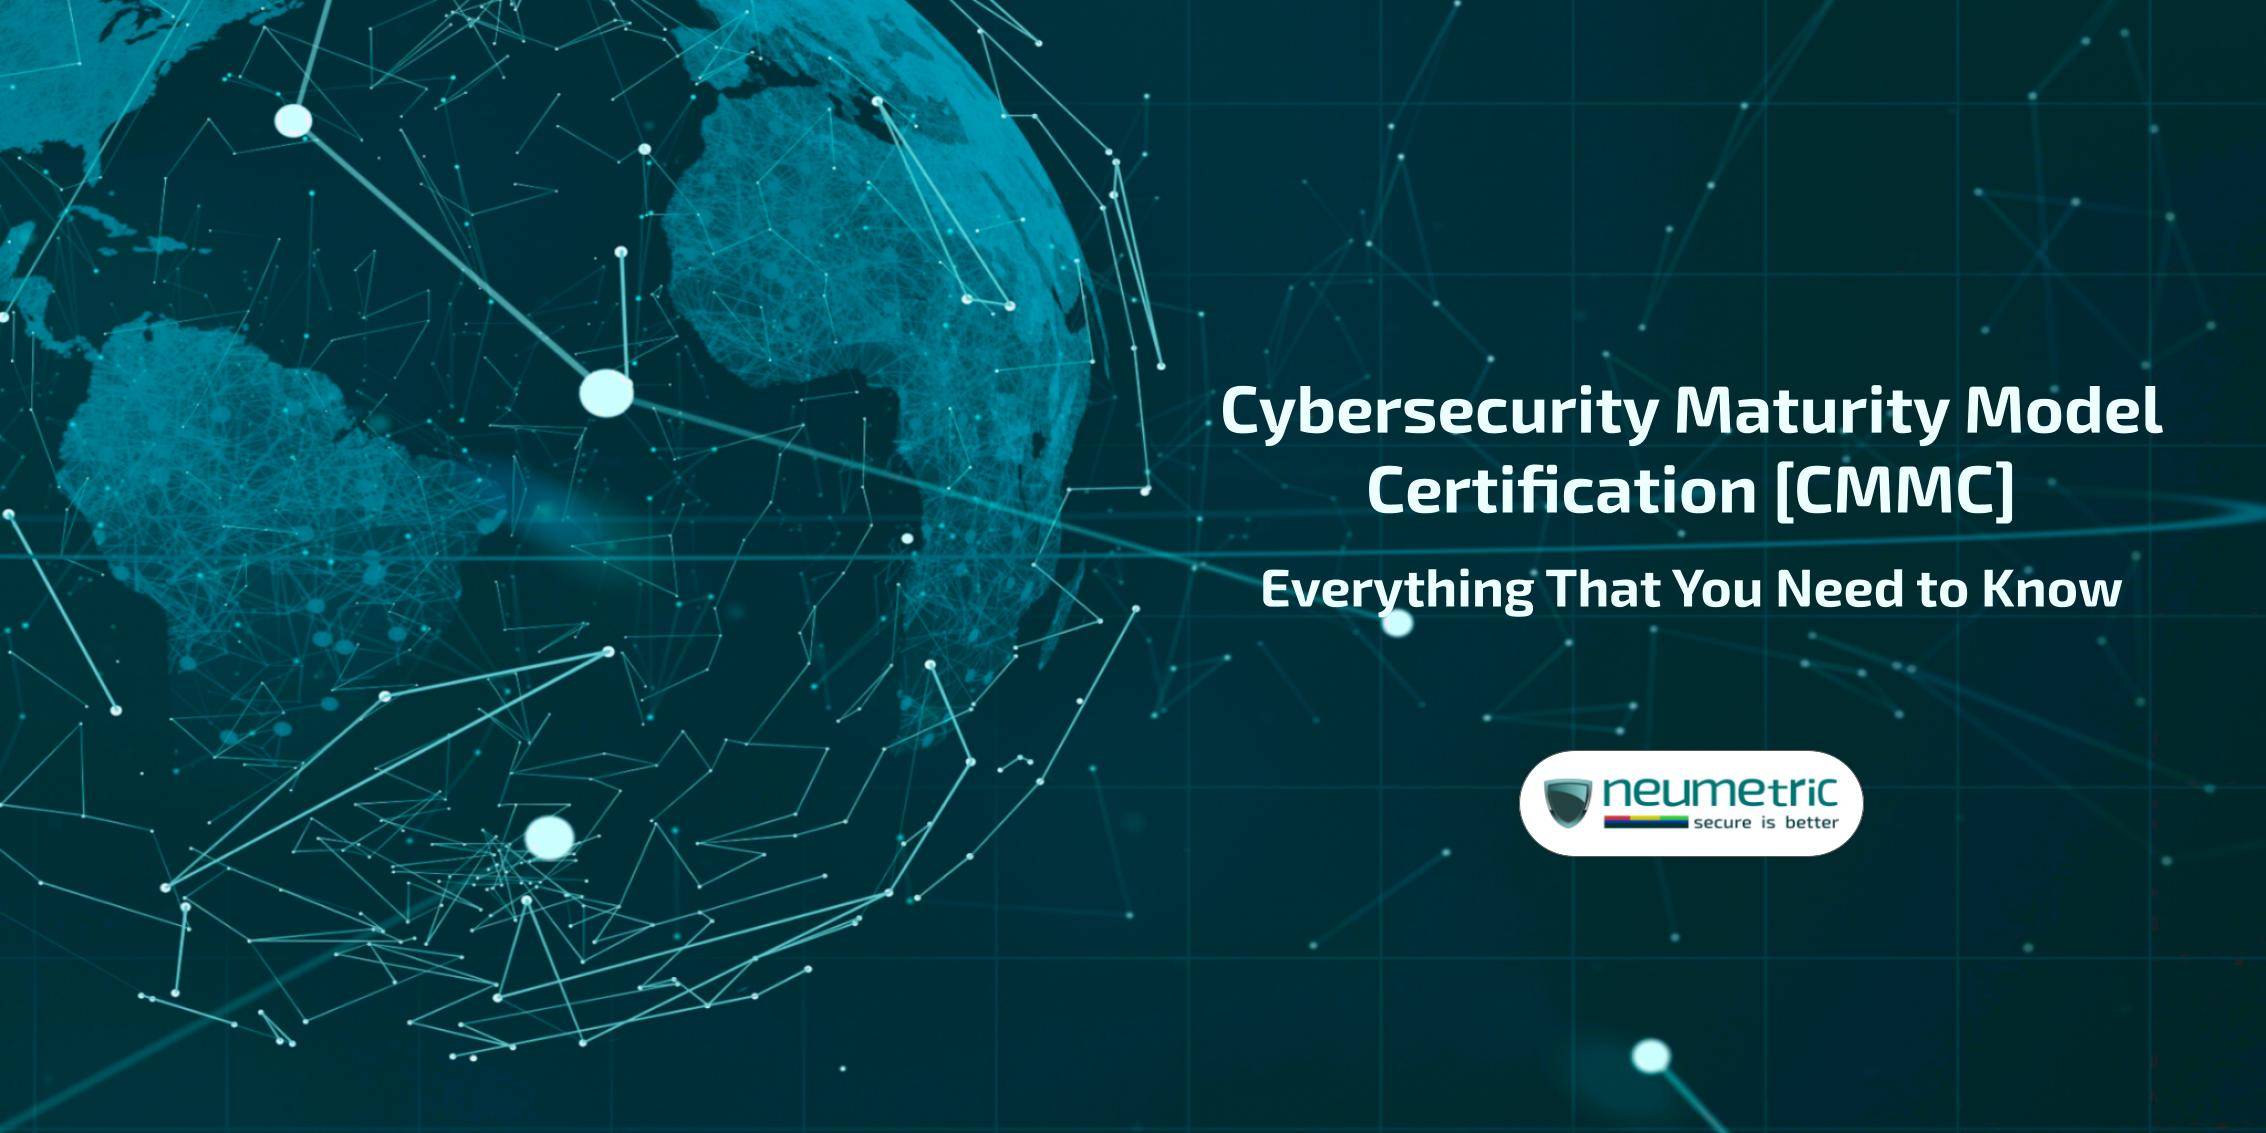 Cybersecurity Maturity Model Certification [CMMC]: Everything That You Need to Know